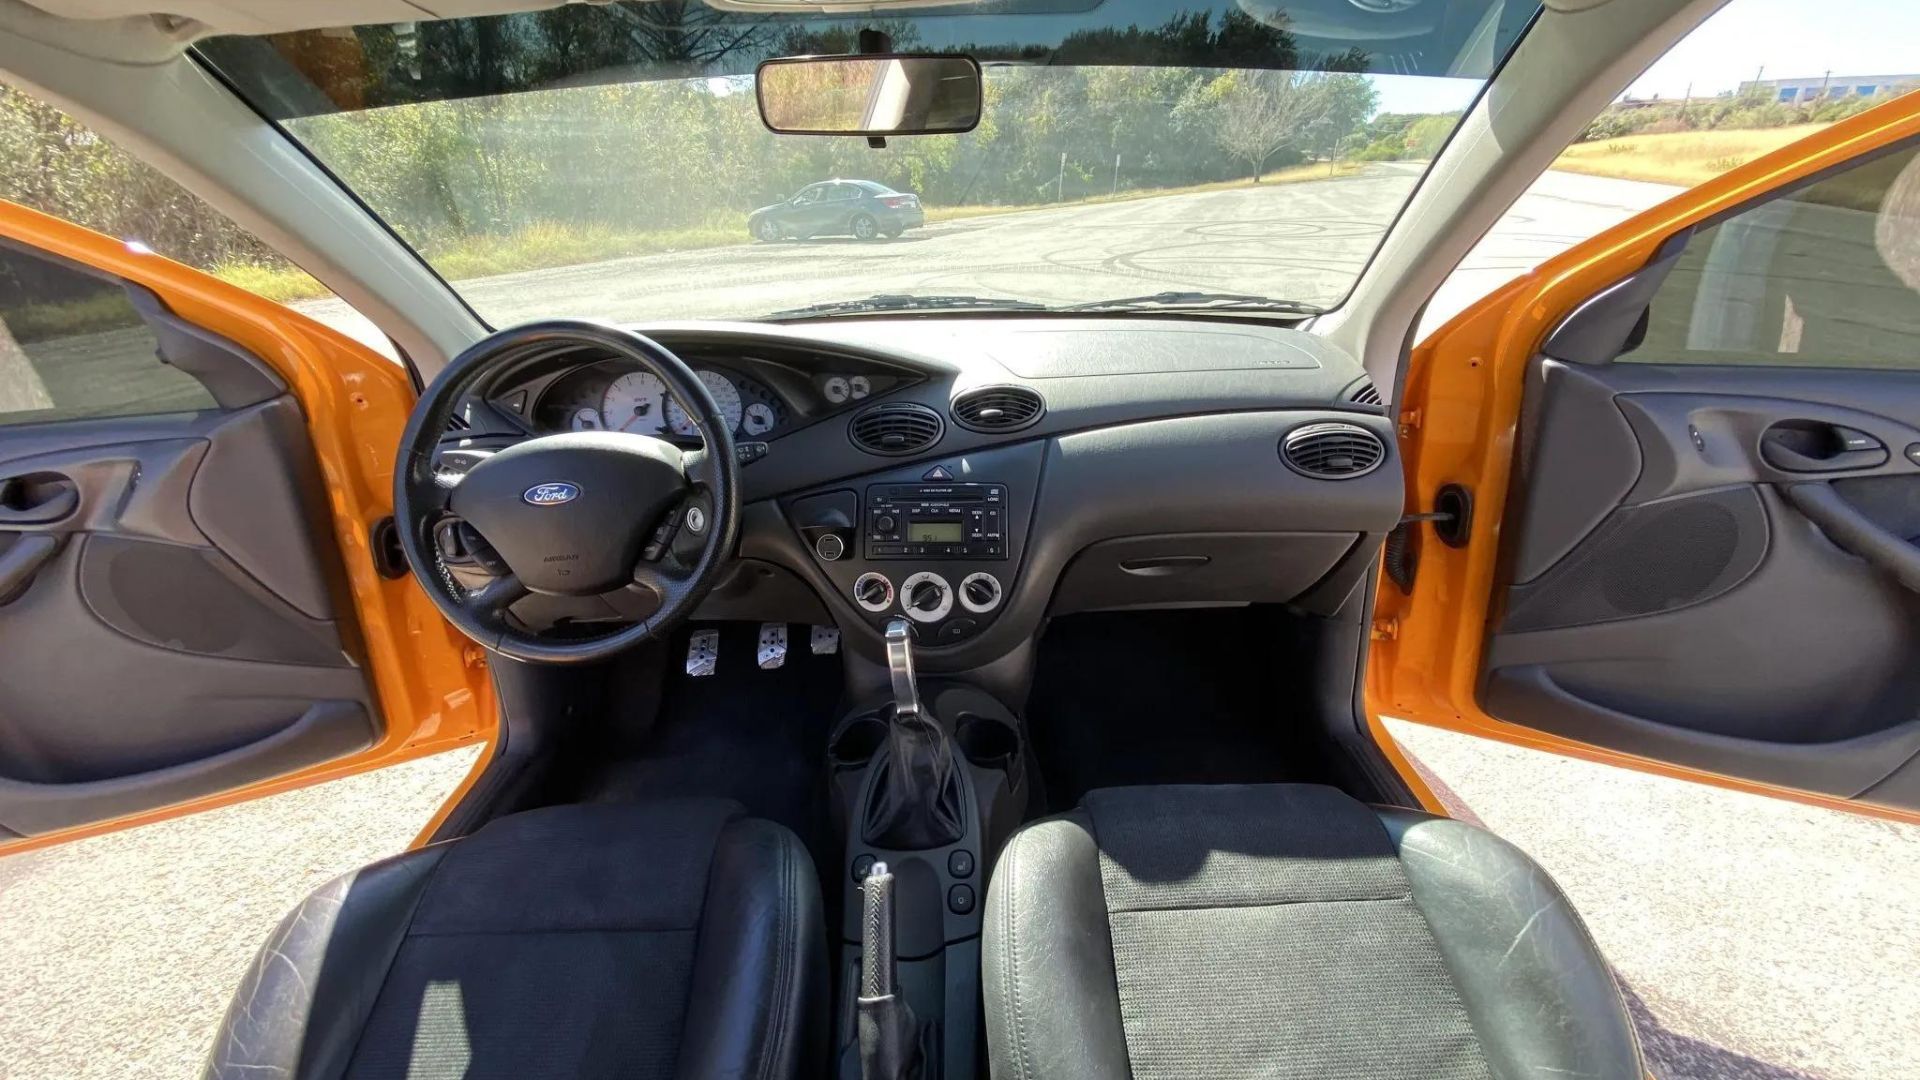 Modified 2003 Ford Focus interior view